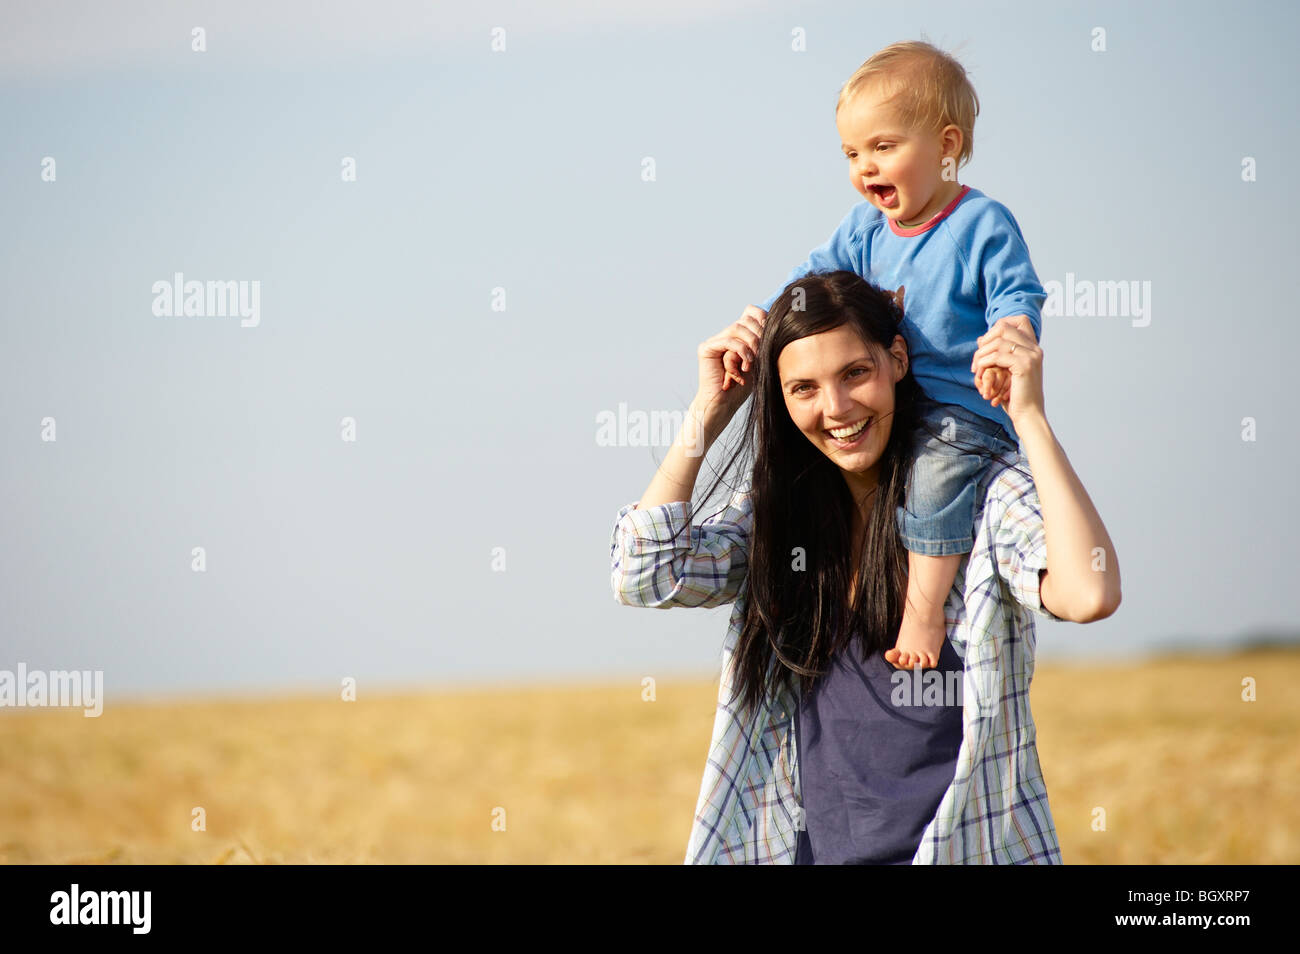 Woman with baby on shoulders, outdoors Stock Photo